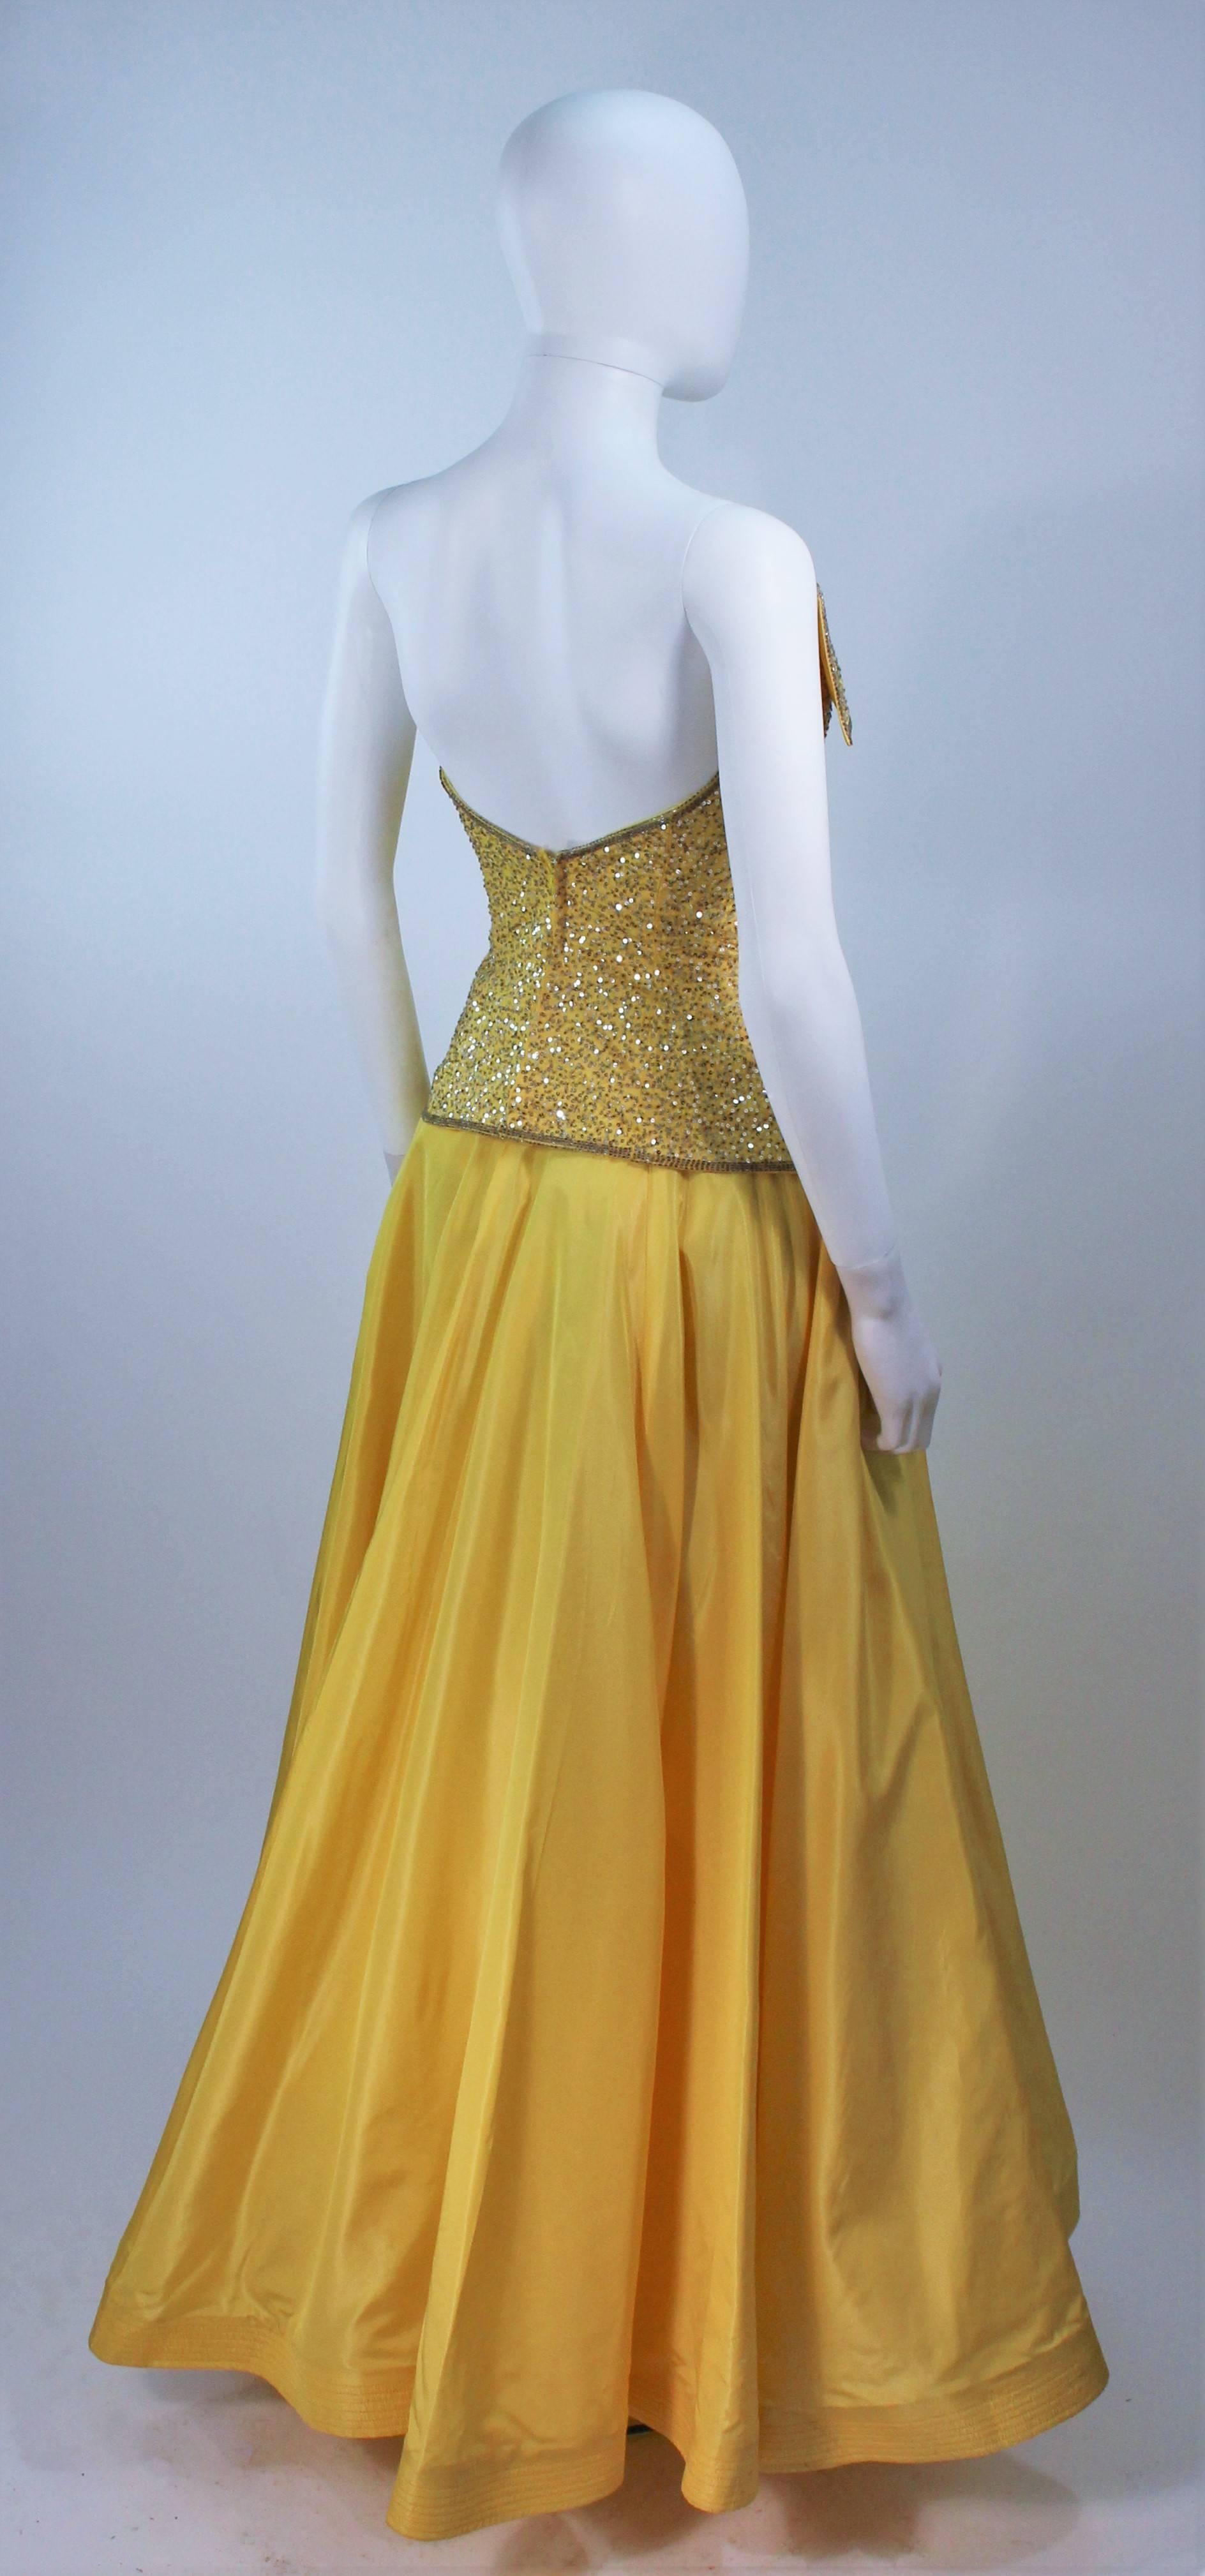 Women's MURRAY ARBEID Yellow Embellished Full Length Strapless Gown Size 2-4 For Sale